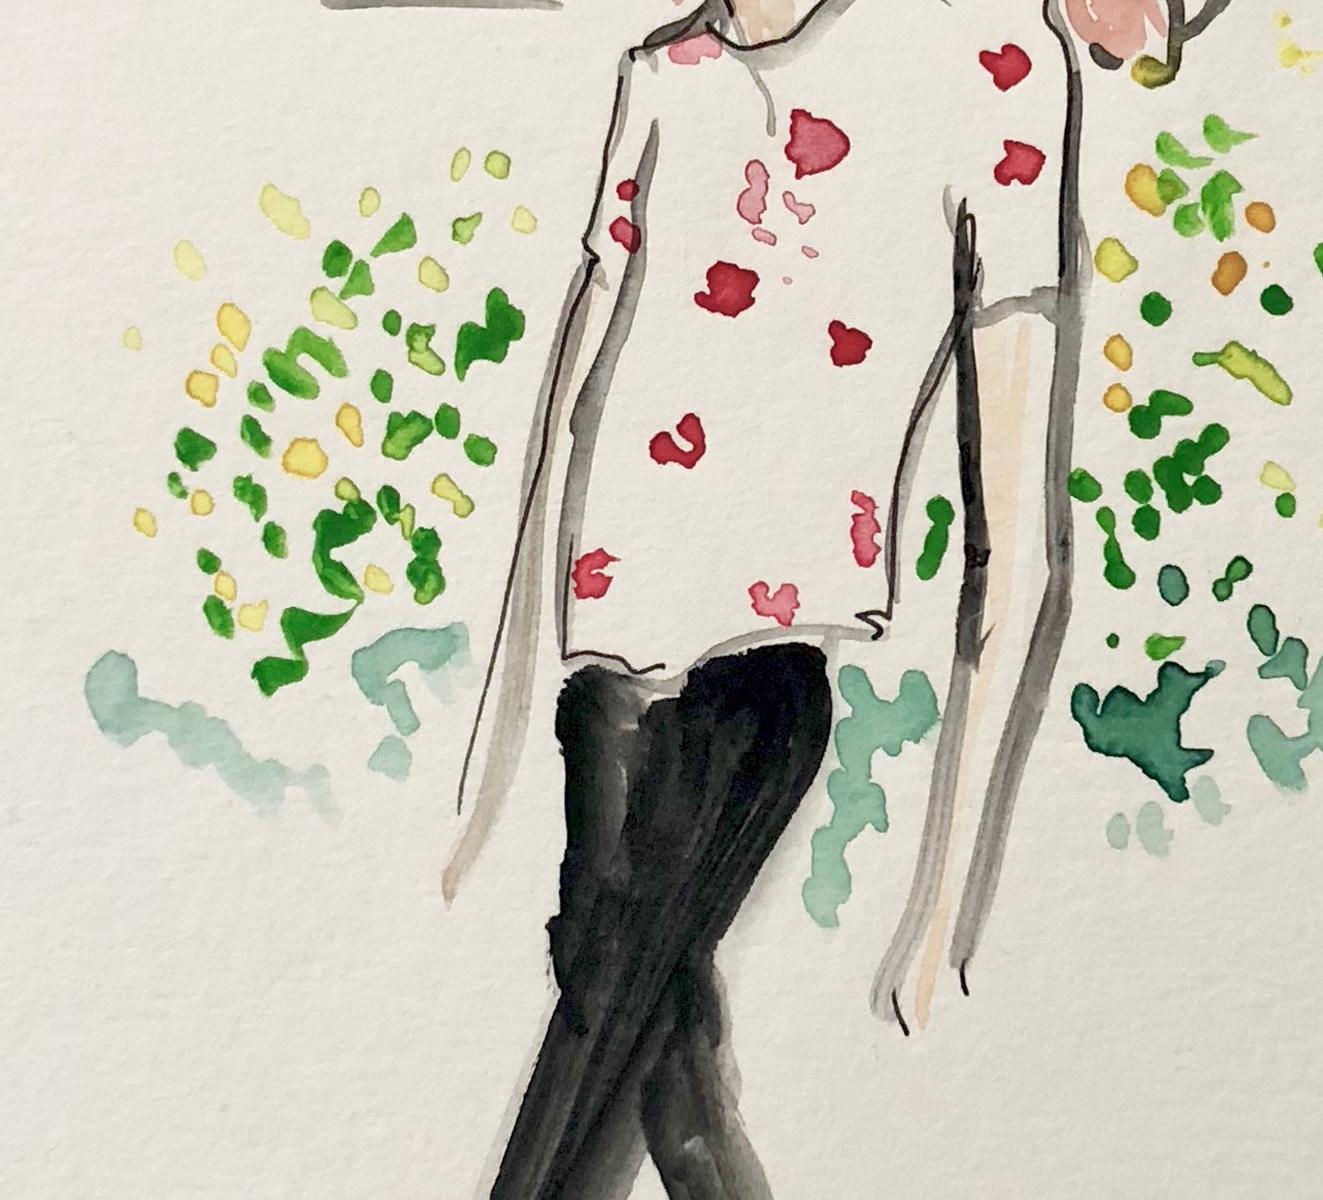 Harry Brant in Connecticut, by Manuel Santelices
Watercolor on paper
Image size: 11 in. H x 8.5 in. W 
Unframed
2017

The worlds of fashion, society, and pop culture are explored through the illustrations of Manuel Santelices, a Chilean artist and